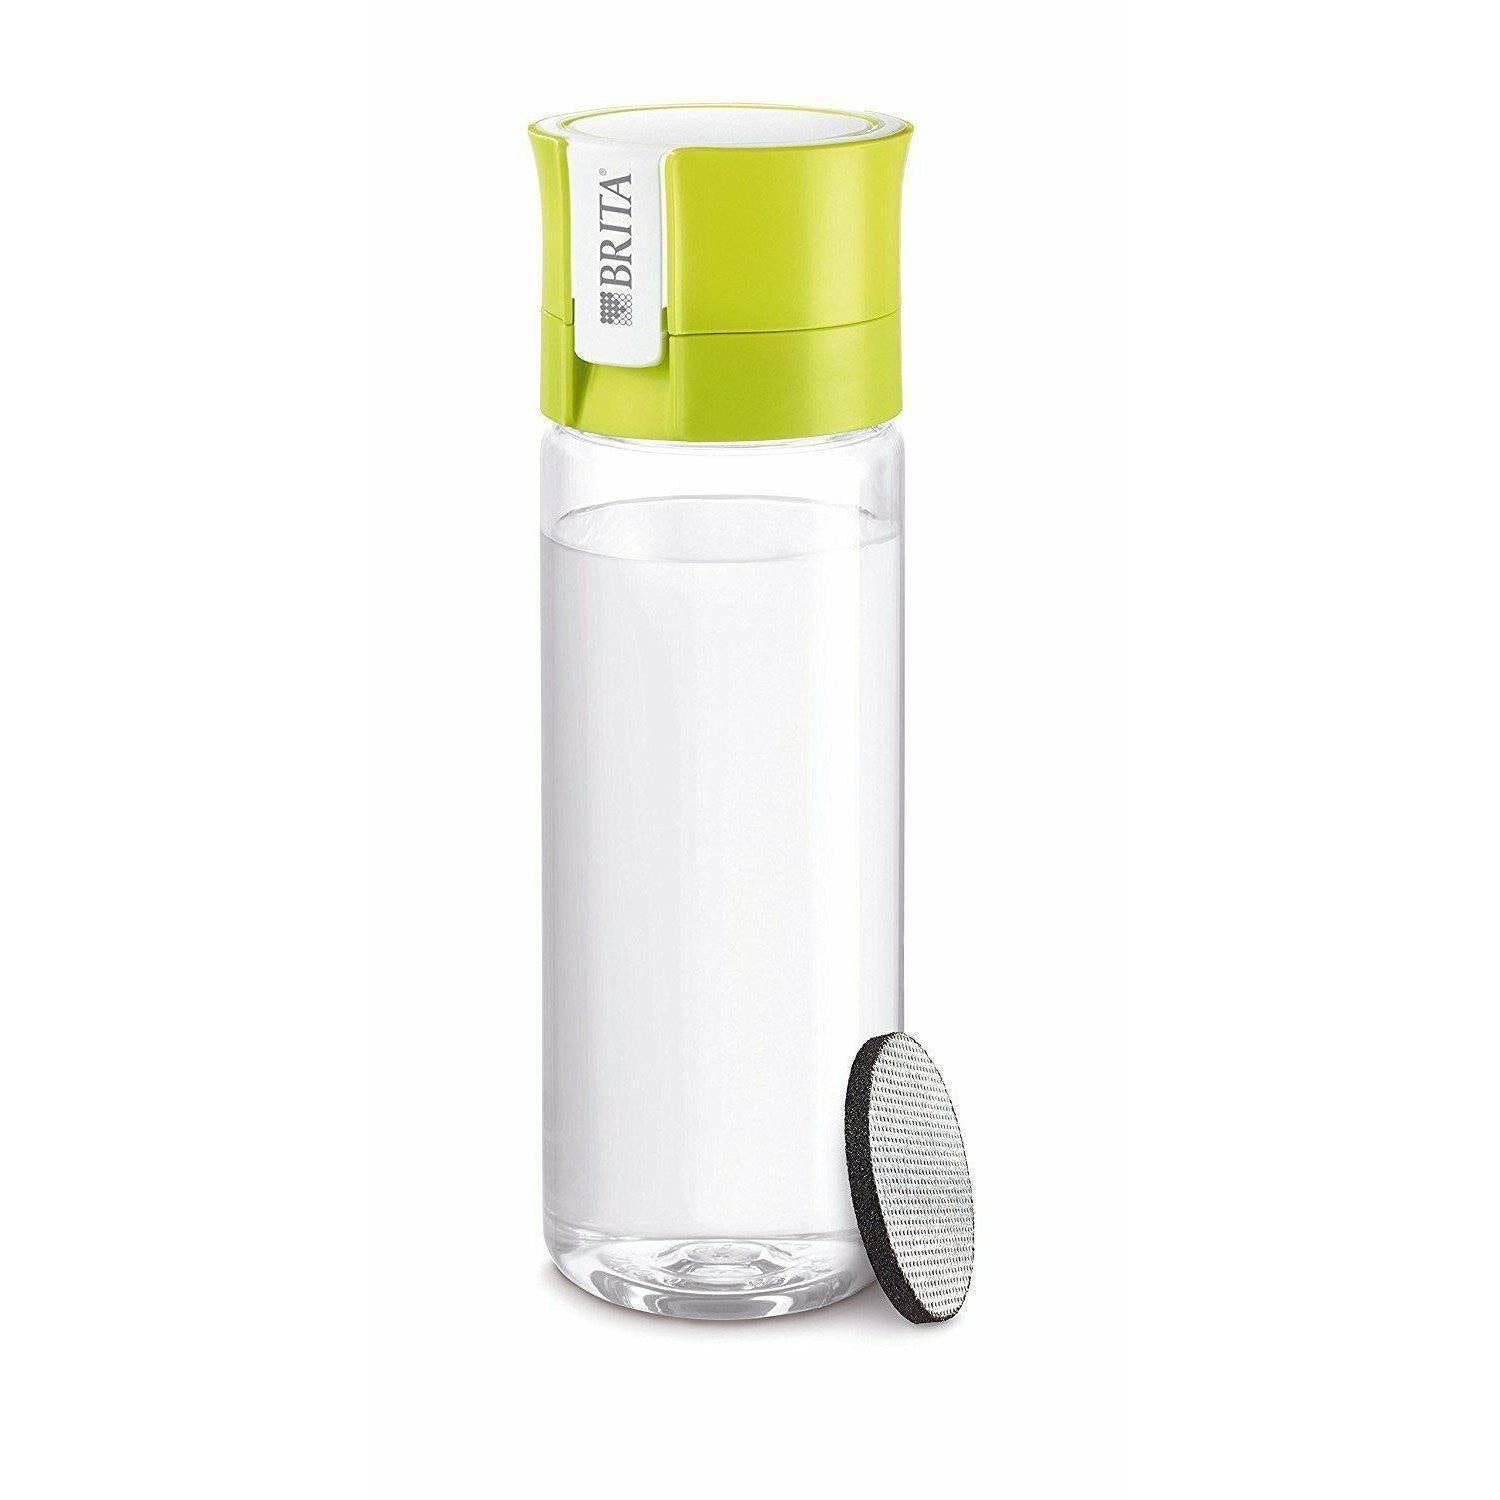 BRITA Fill & Go Vital Water Bottle with MicroDisc Filter - Lime, 600 mL. - Healthxpress.ie